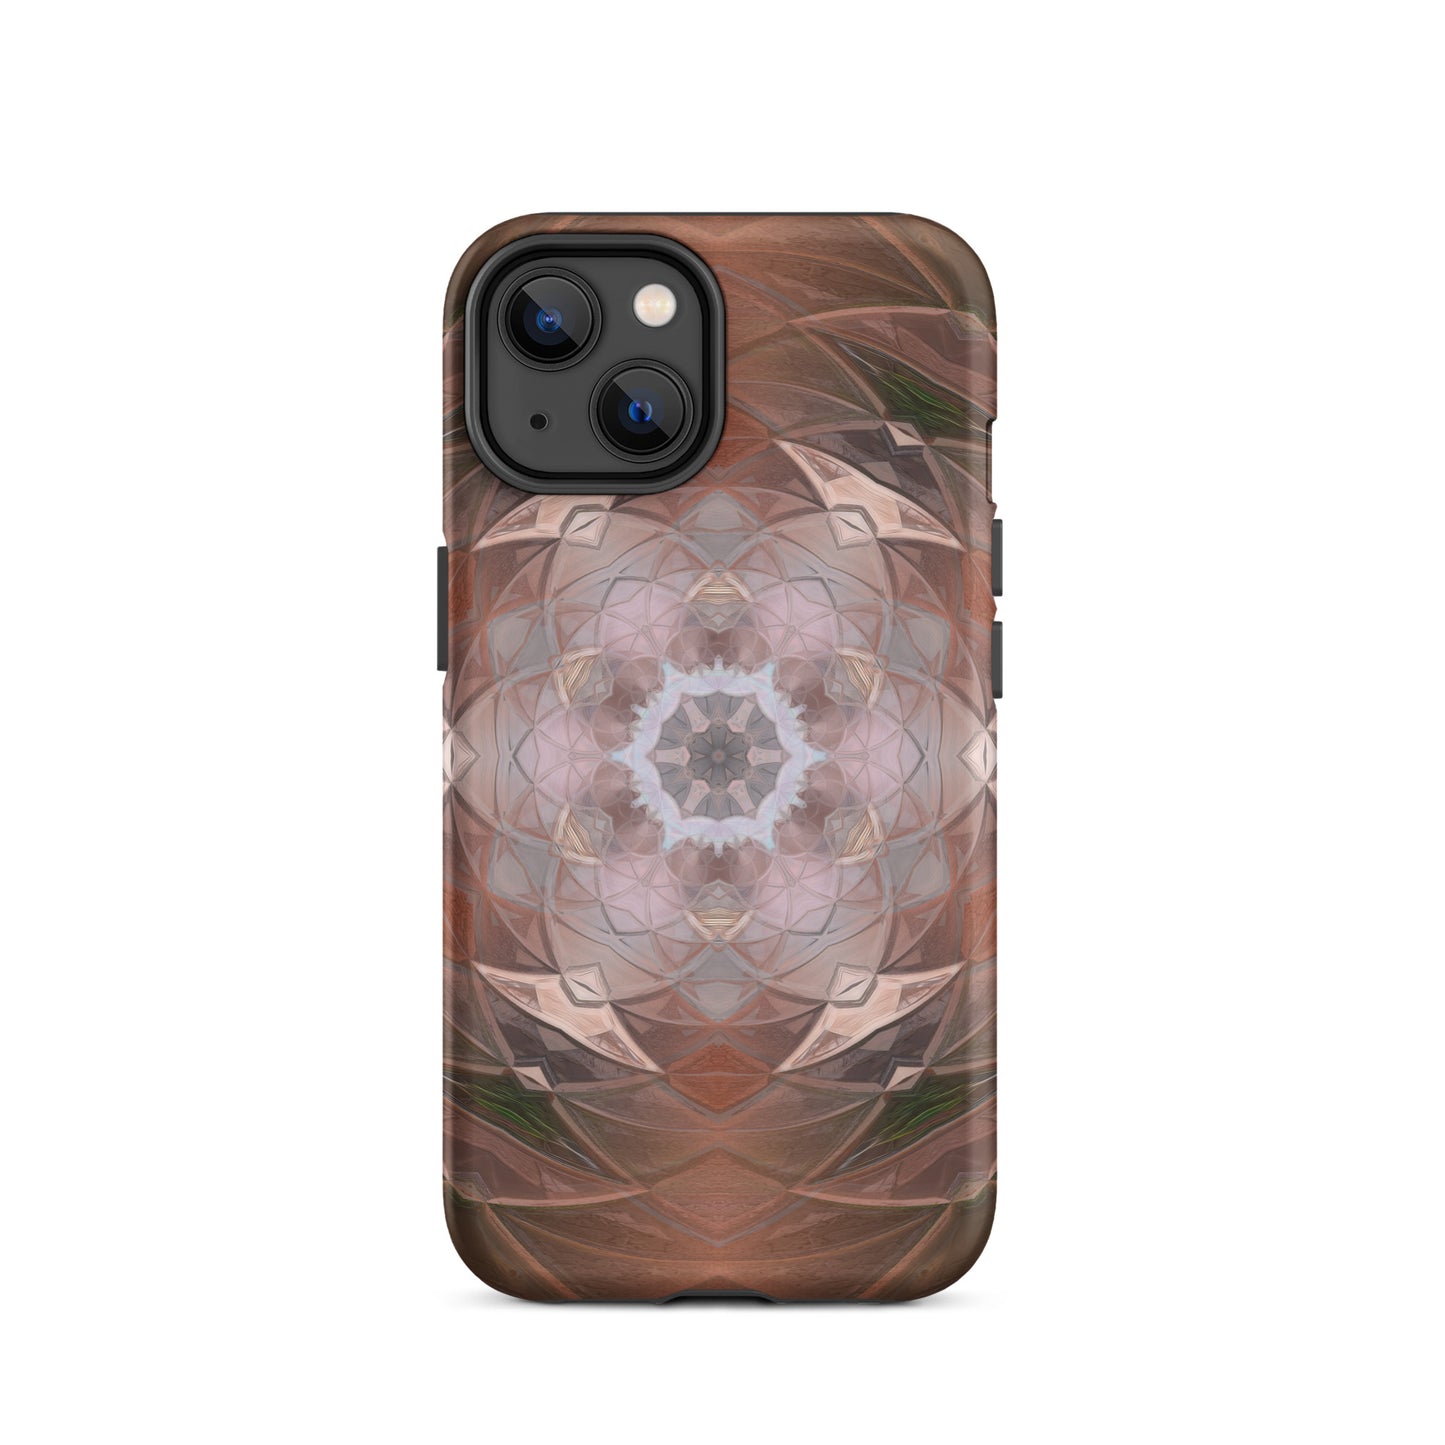 "Riveted" Tough iPhone case